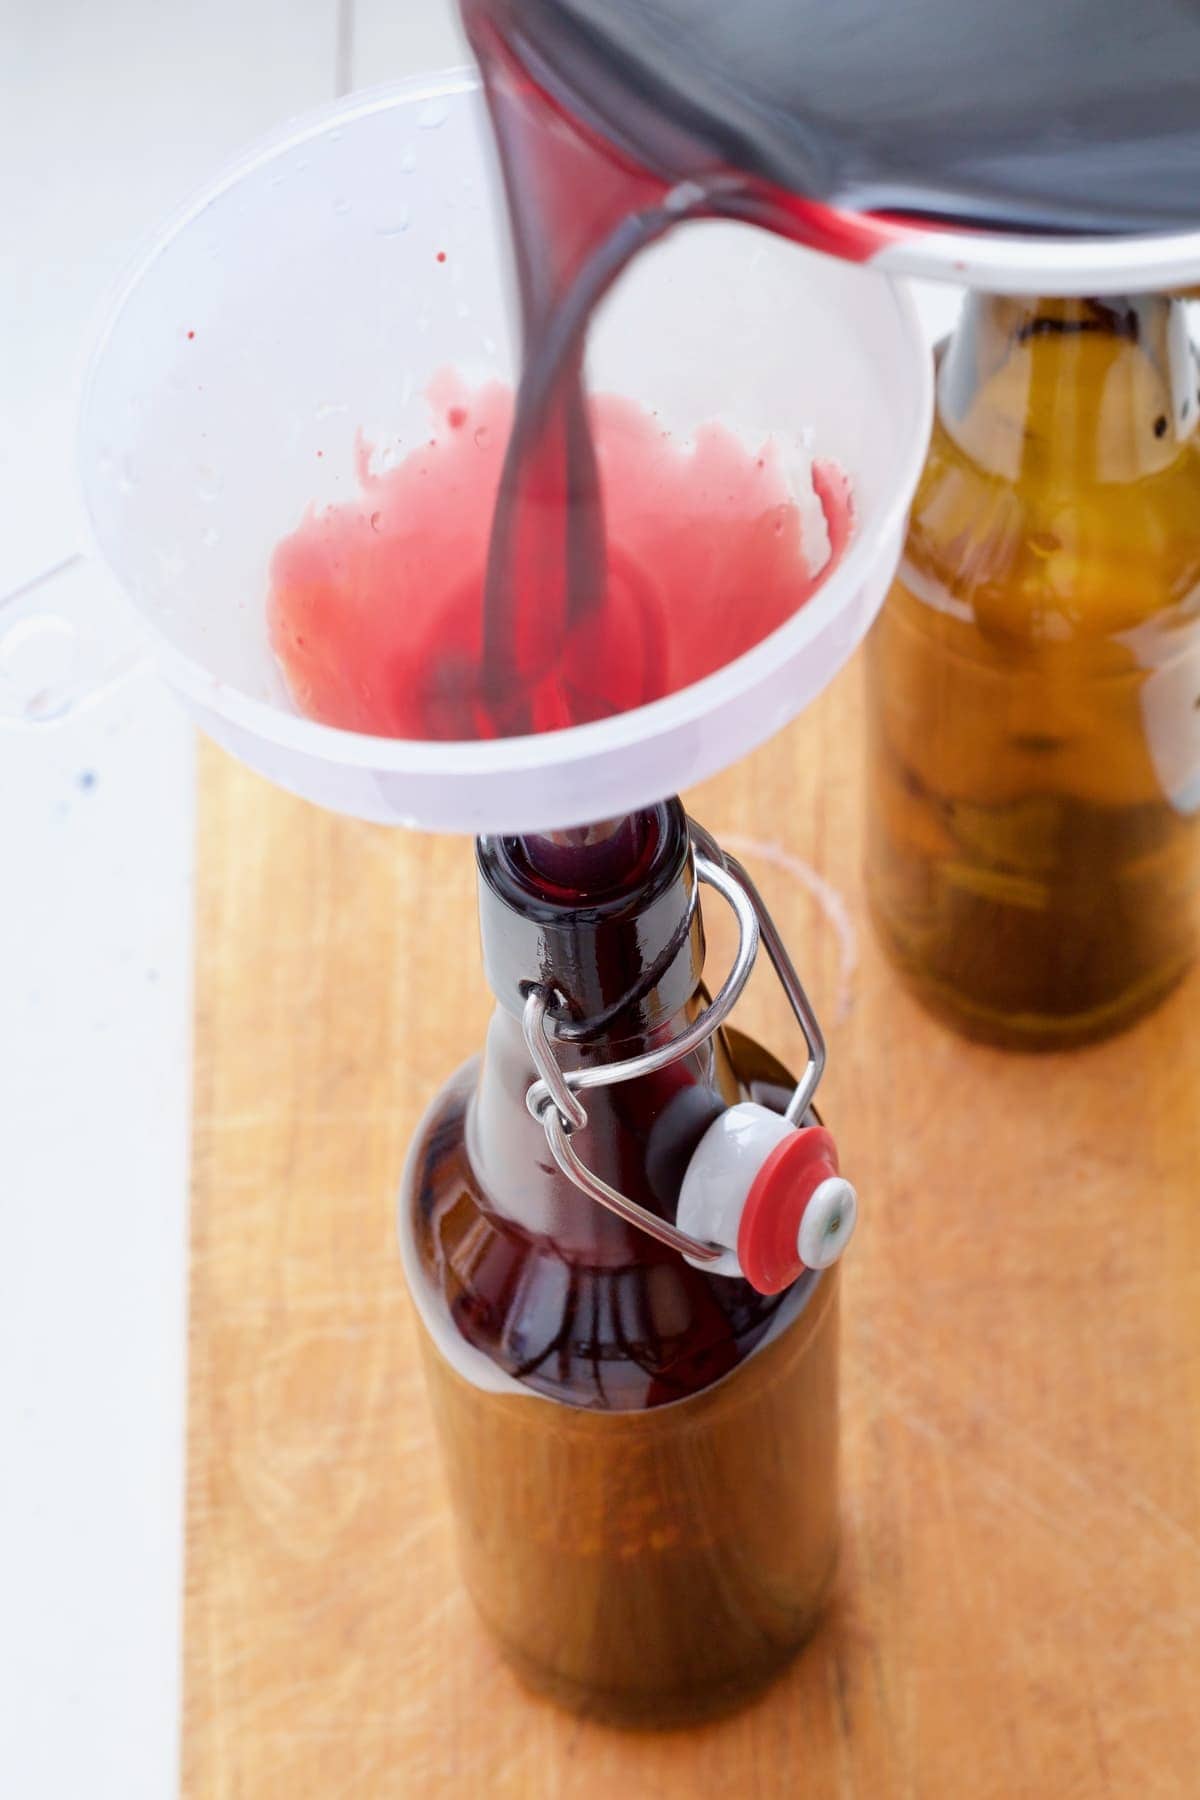 Pouring syrup into a bottle through a funnel.